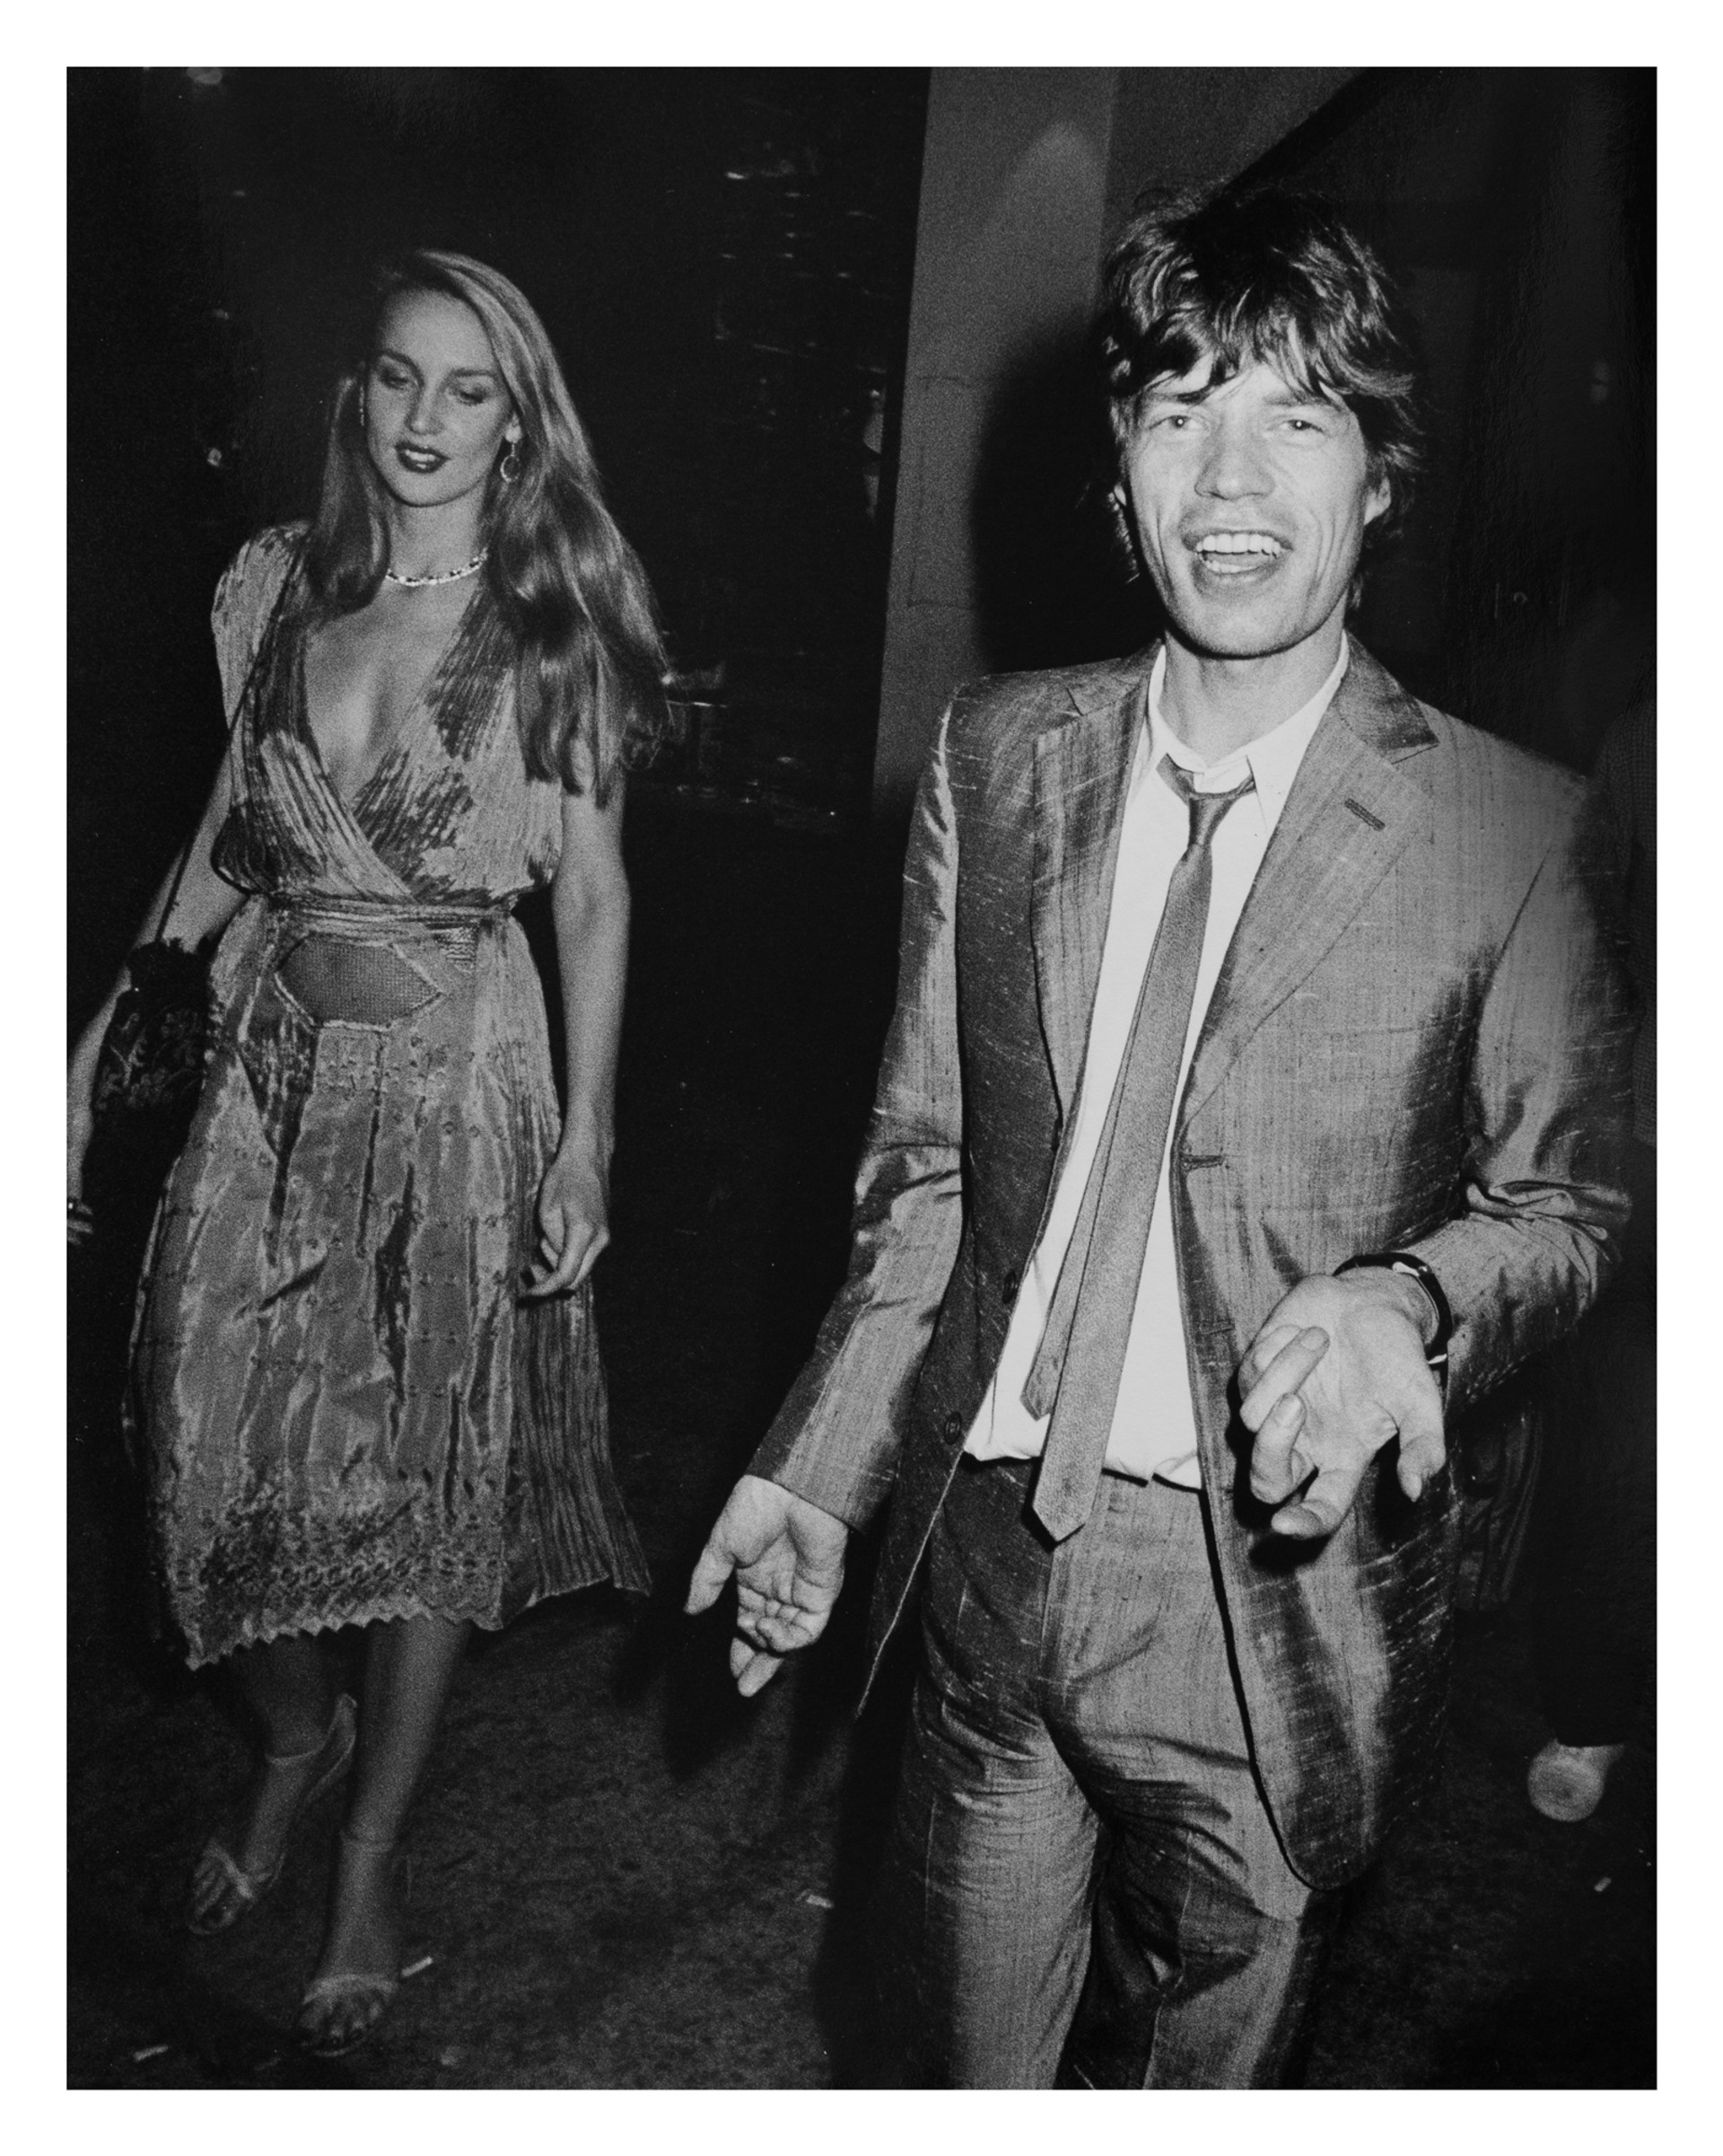 Mick Jagger and Jerry Hall by Ron Galella